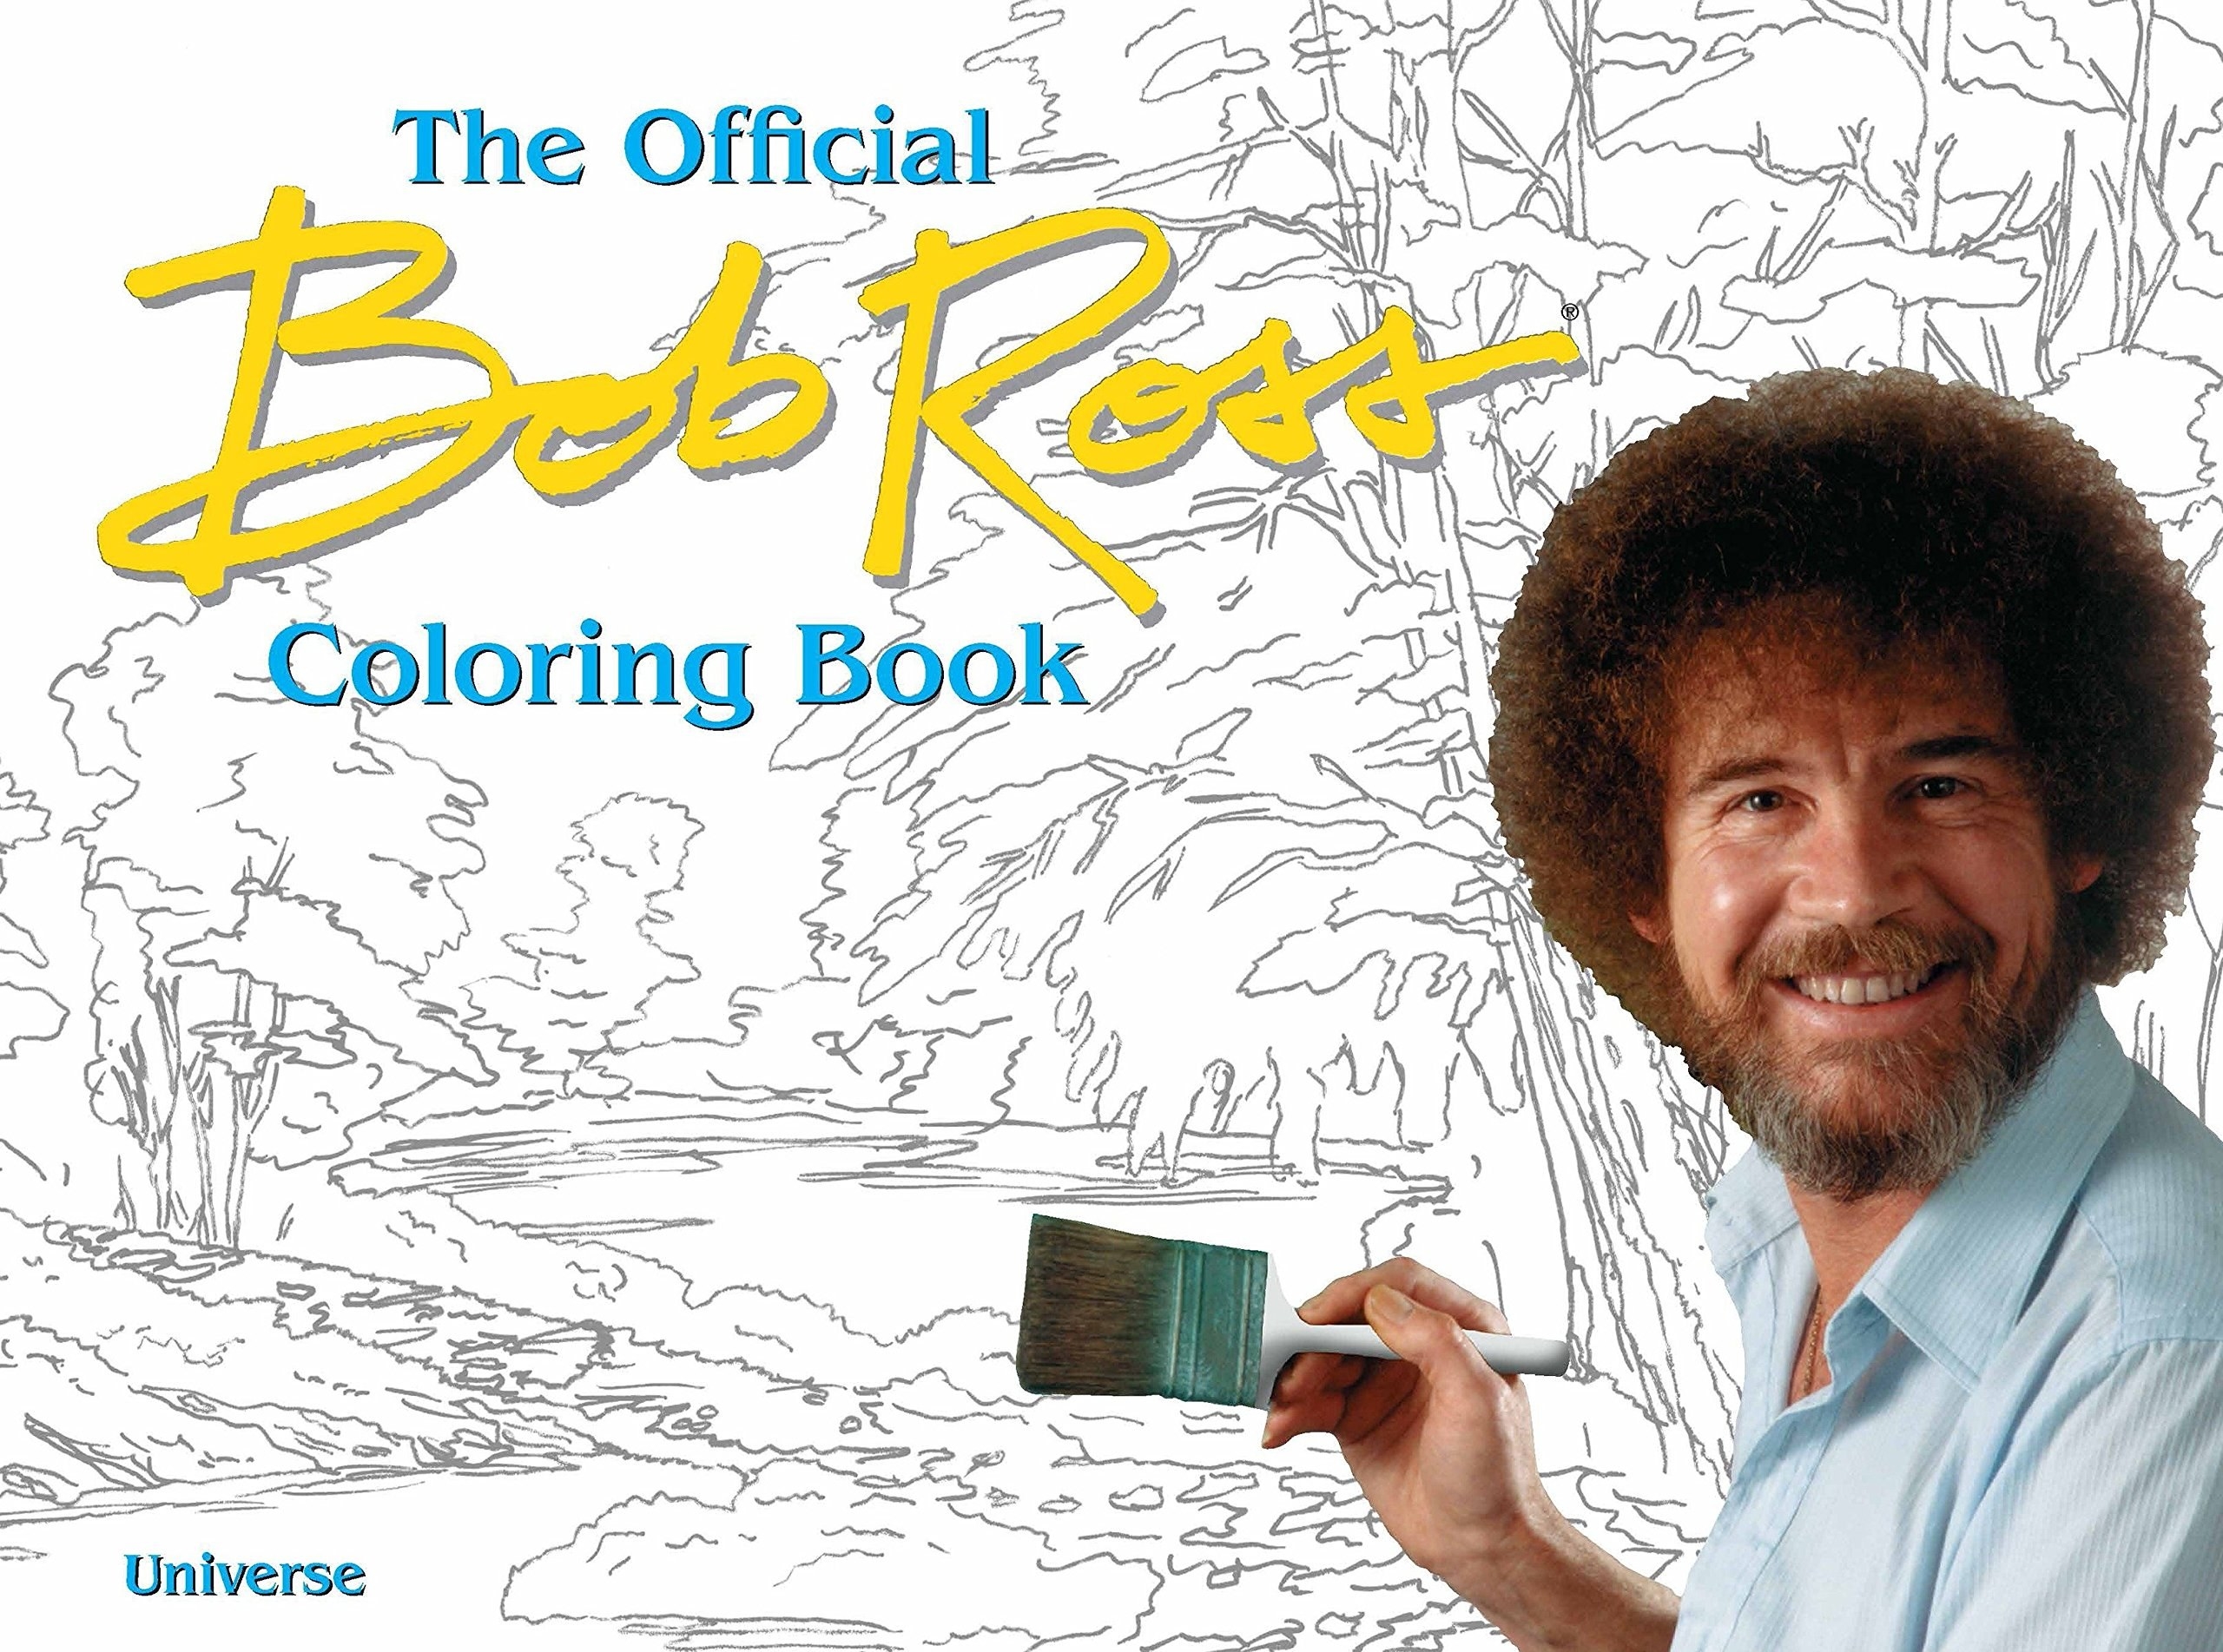 The cover of the coloring book, featuring a picture of Bob Ross